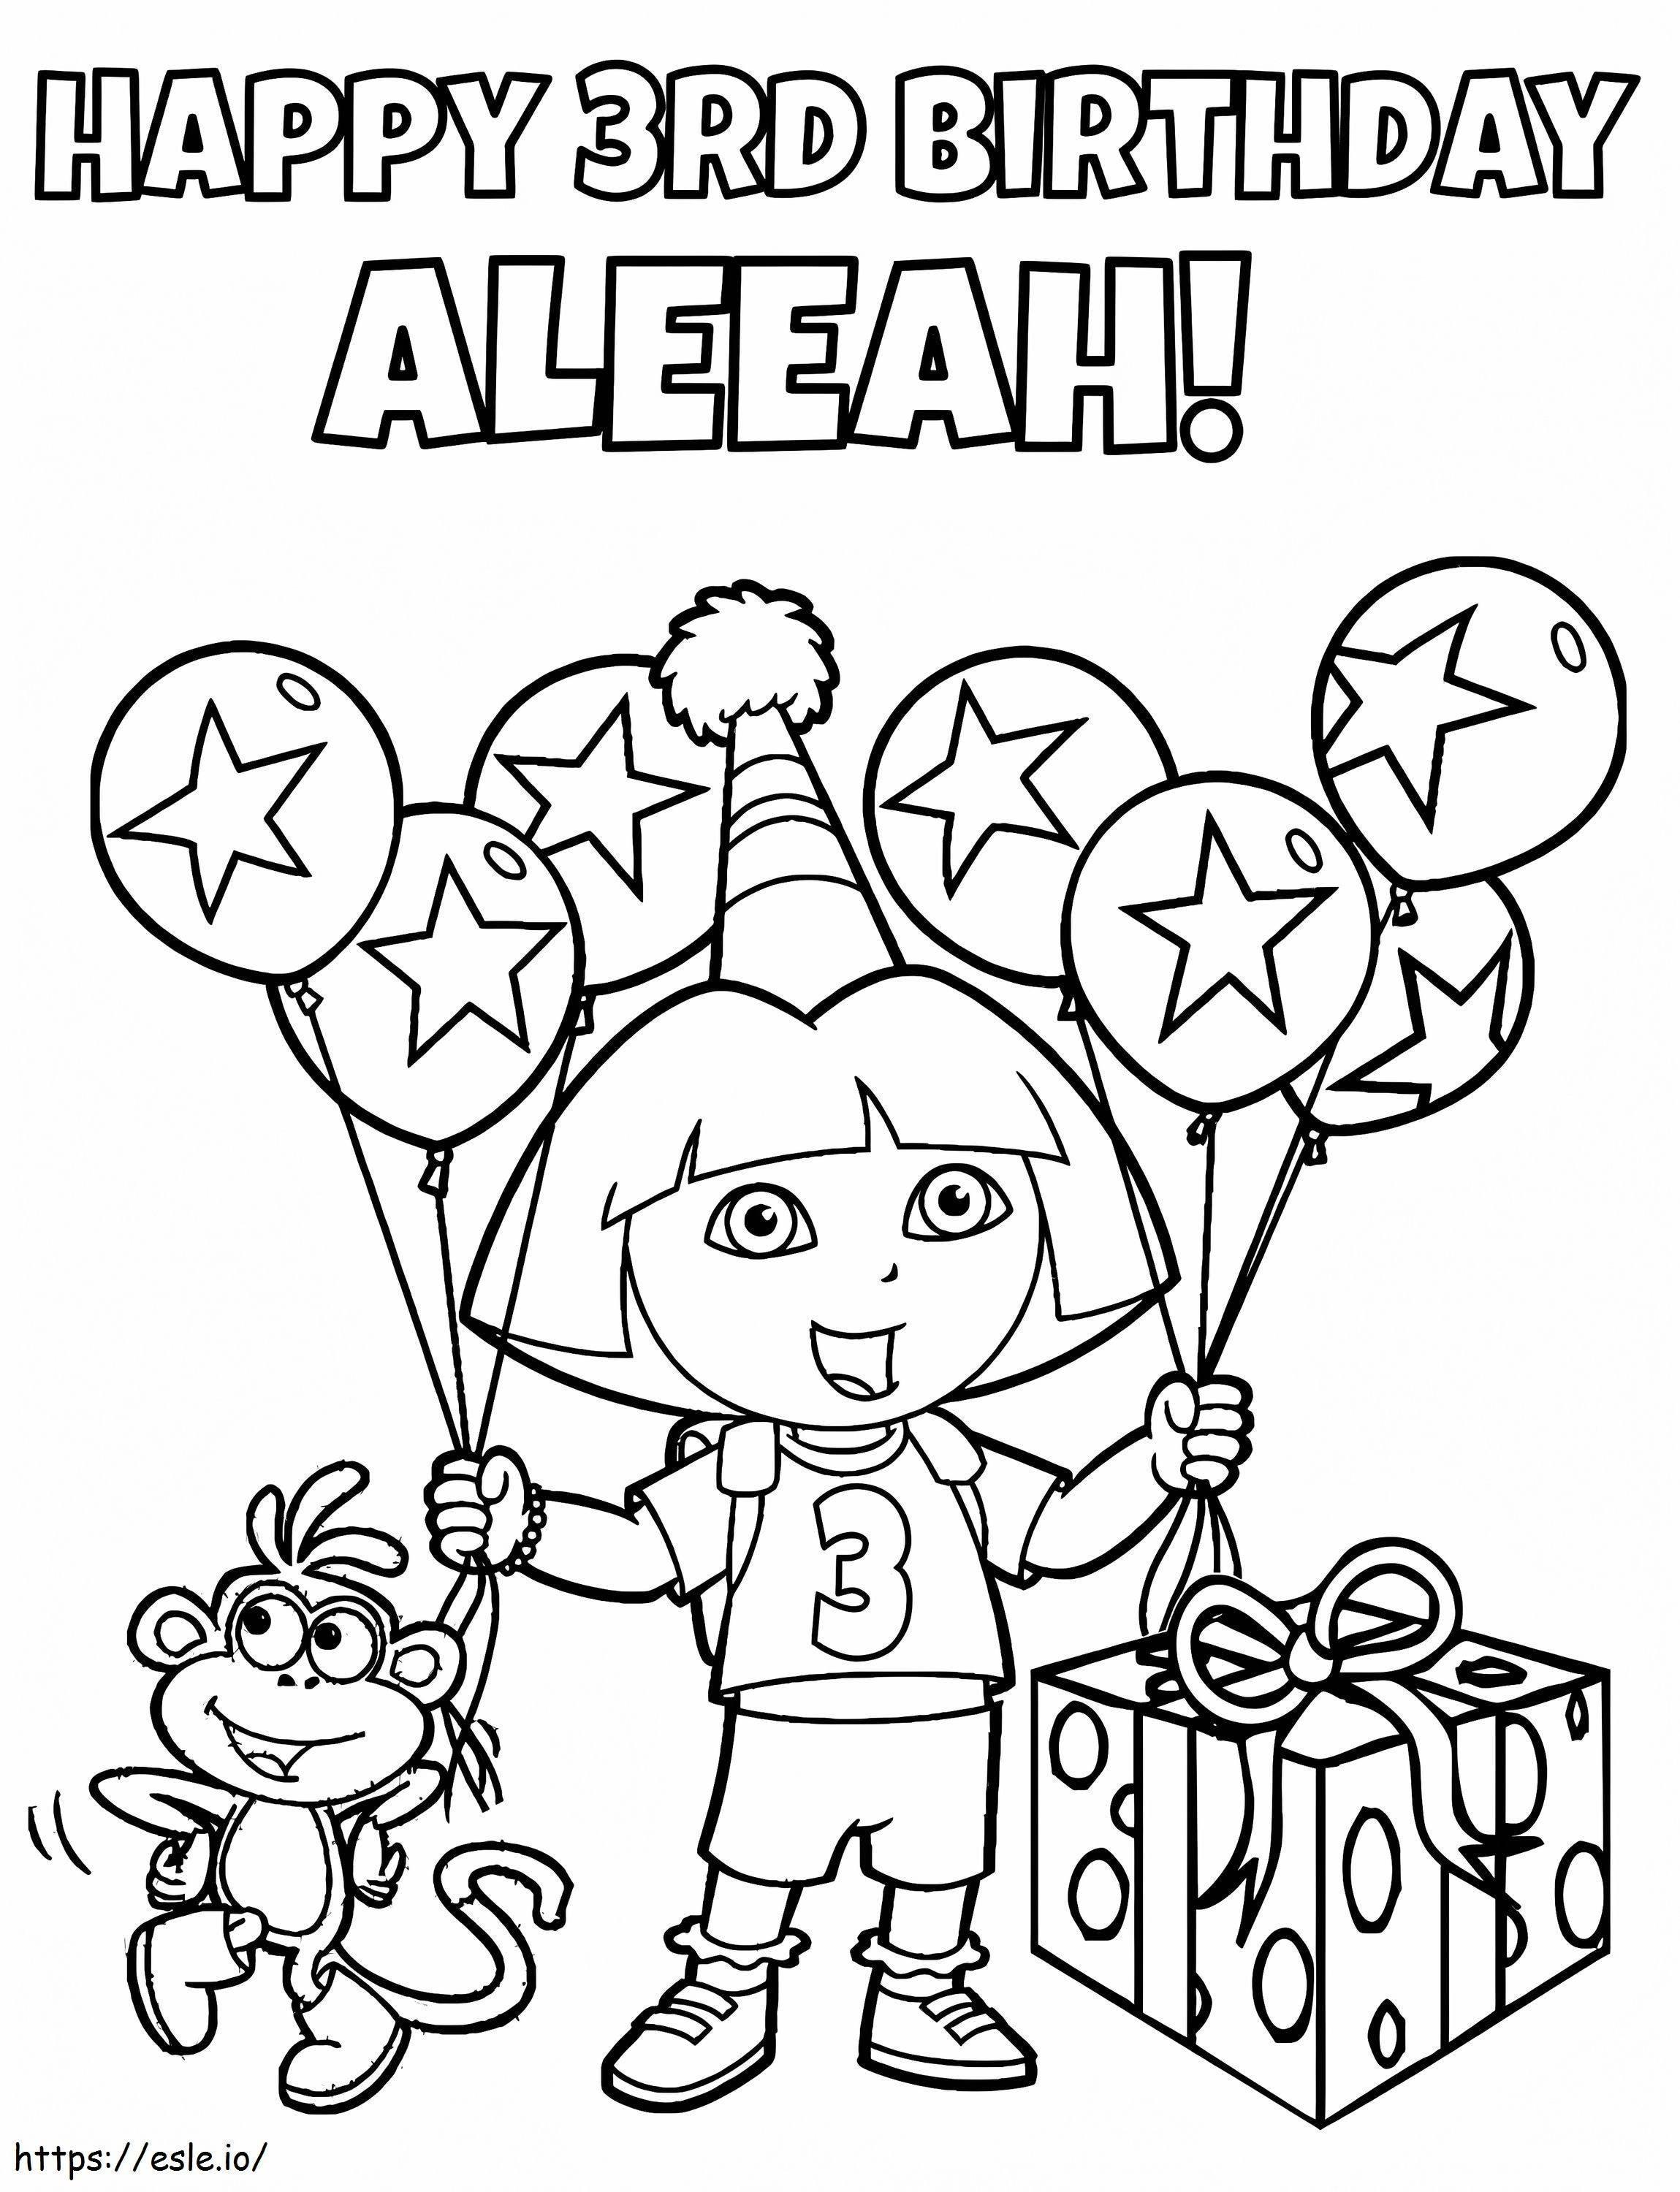 Dora On Birthday coloring page